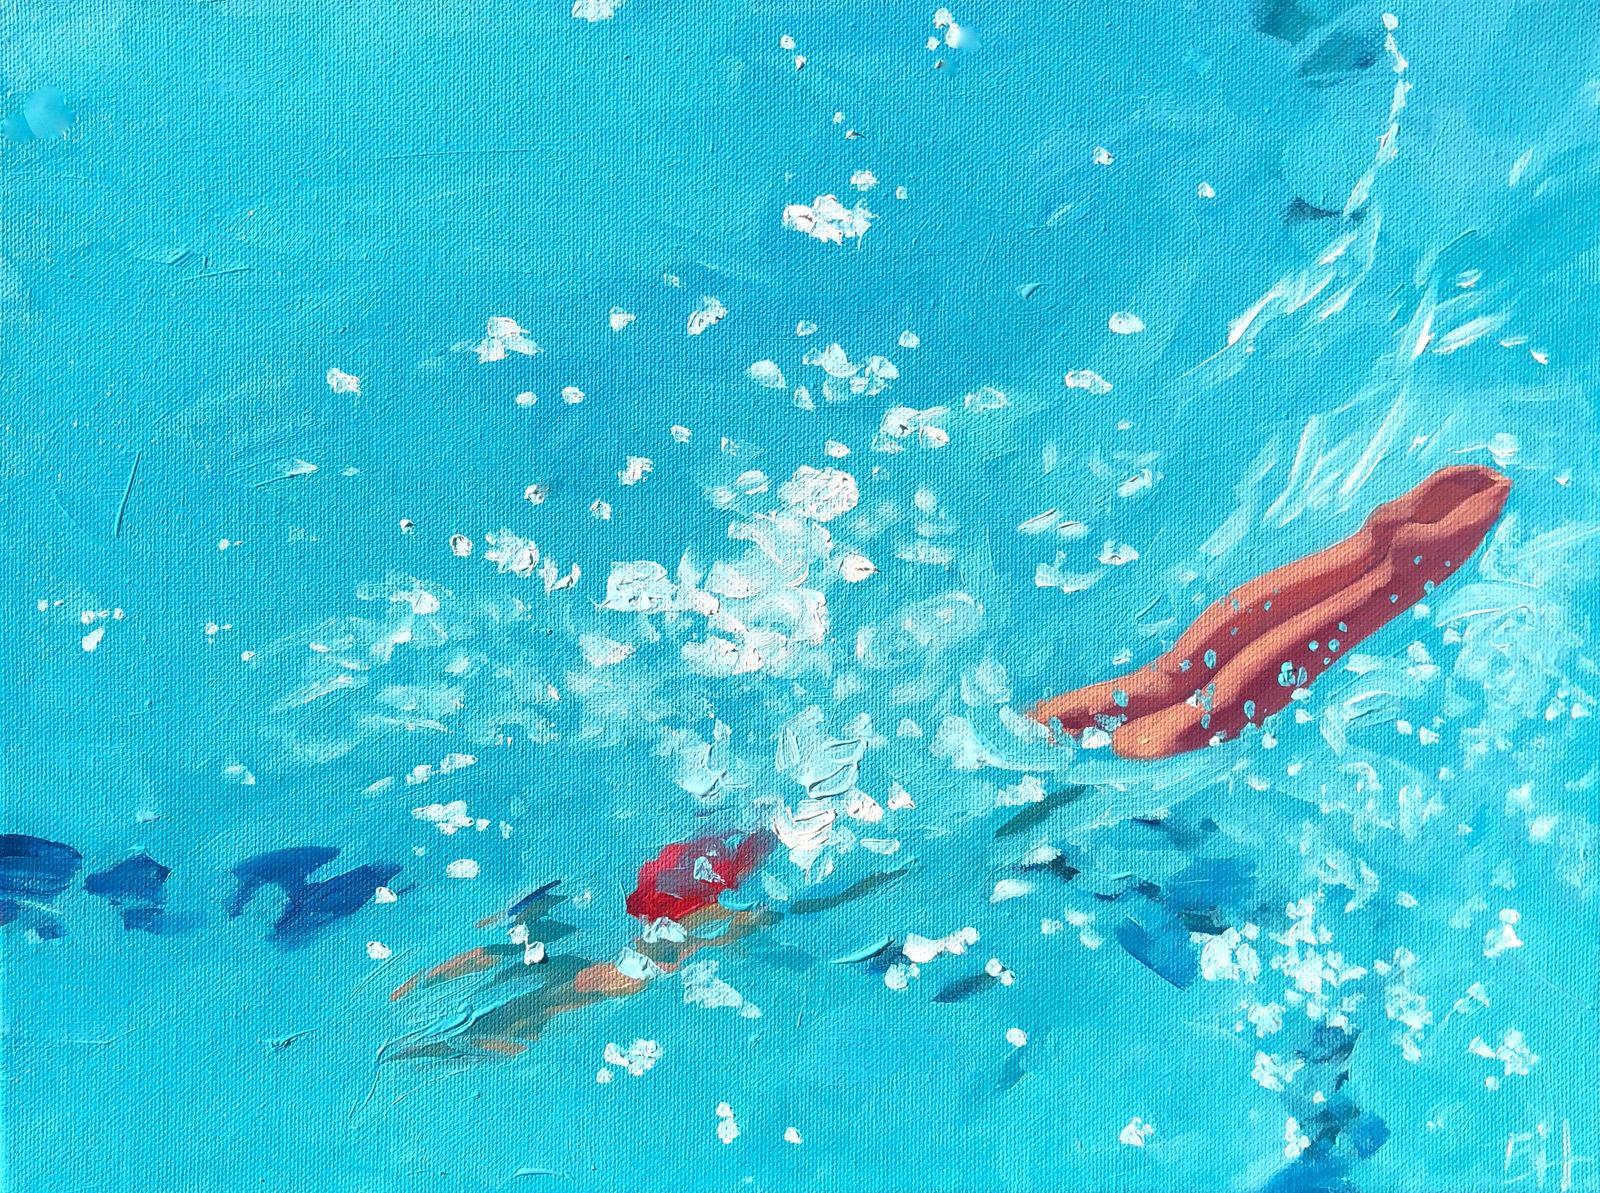 T.S. Harris Figurative Painting - "Diving In" Oil painting of a figure diving into turquoise water with splash